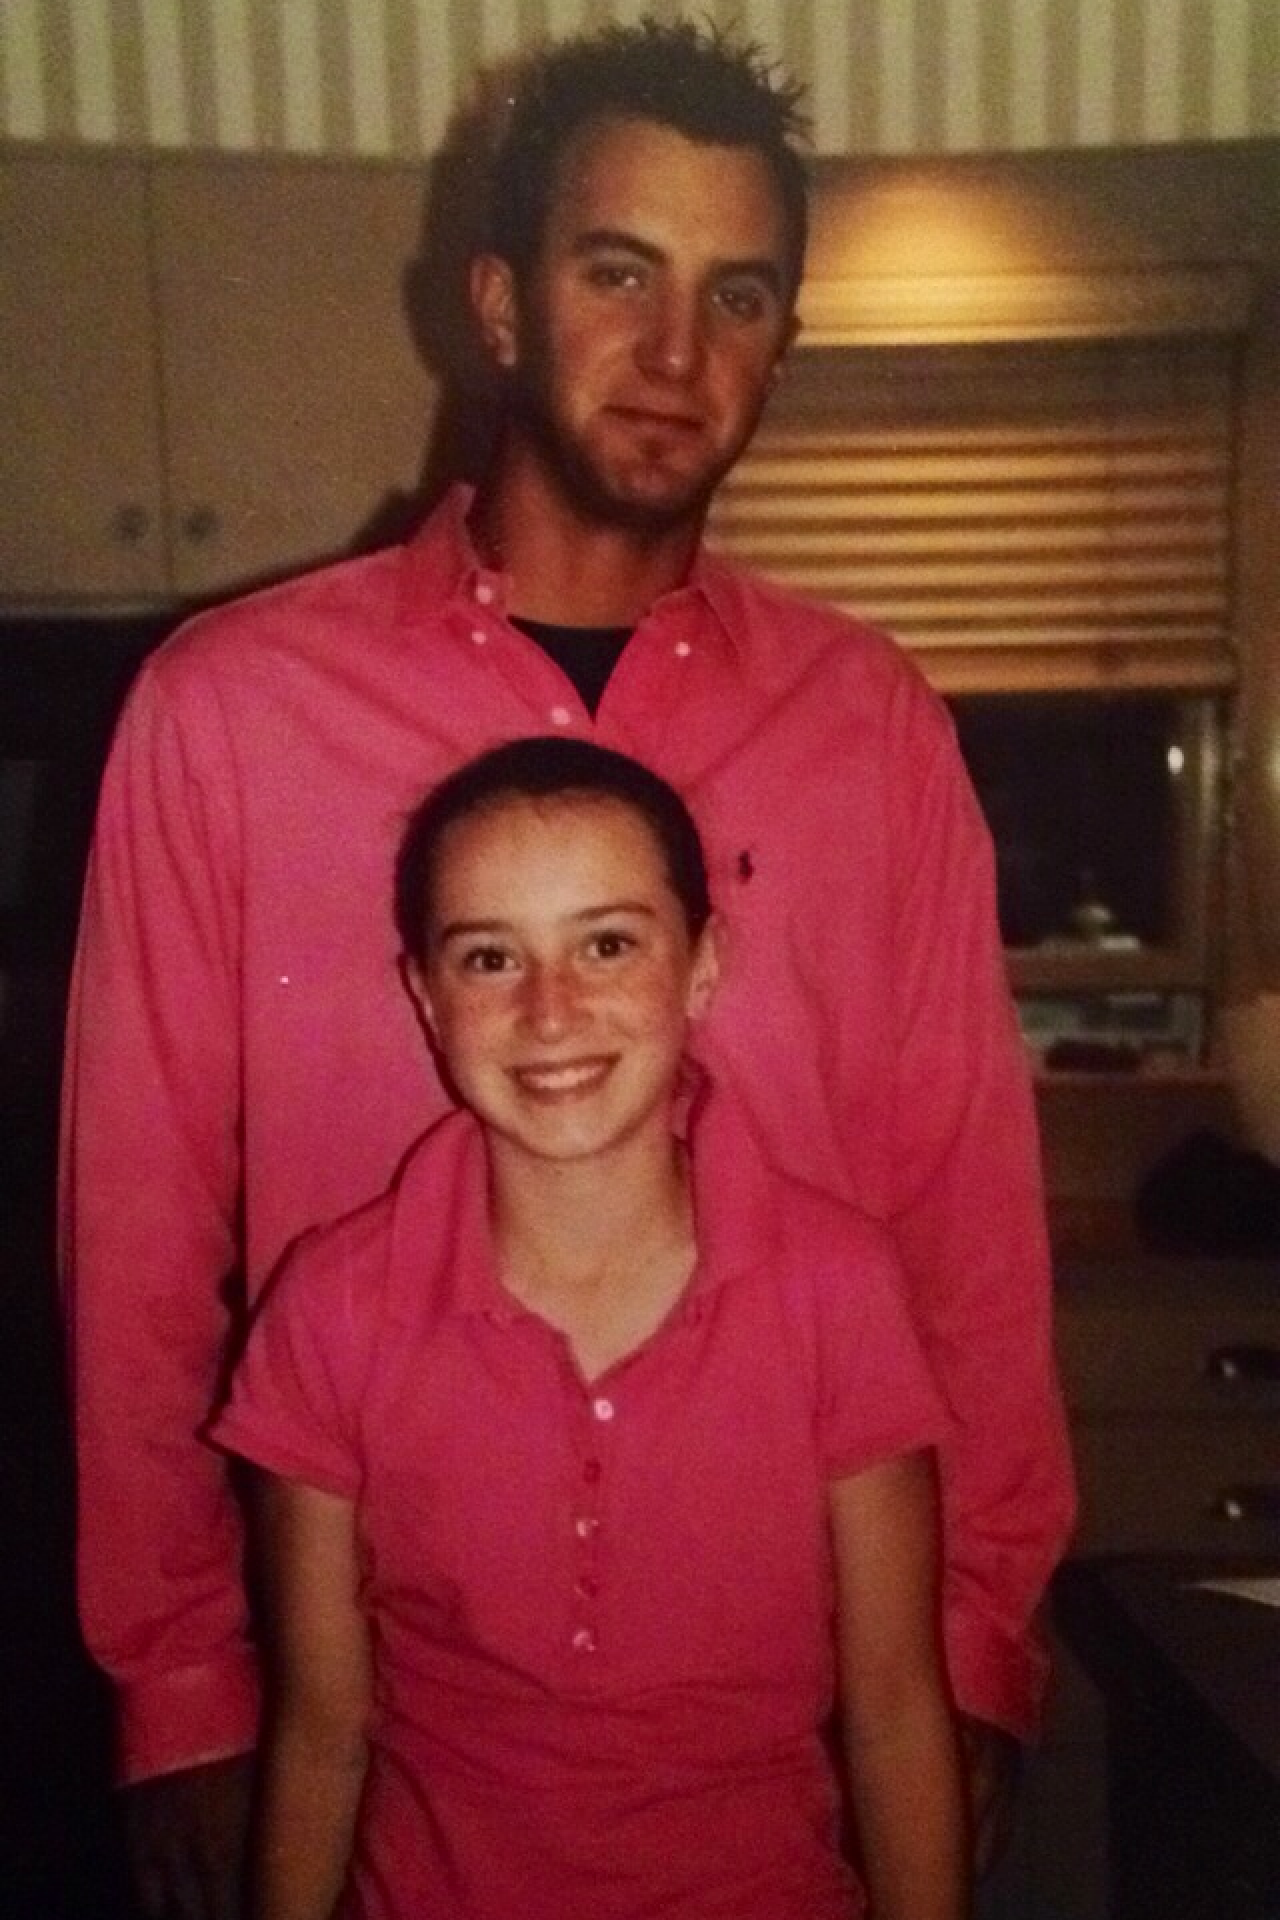 The time Dustin Johnson stayed with my family